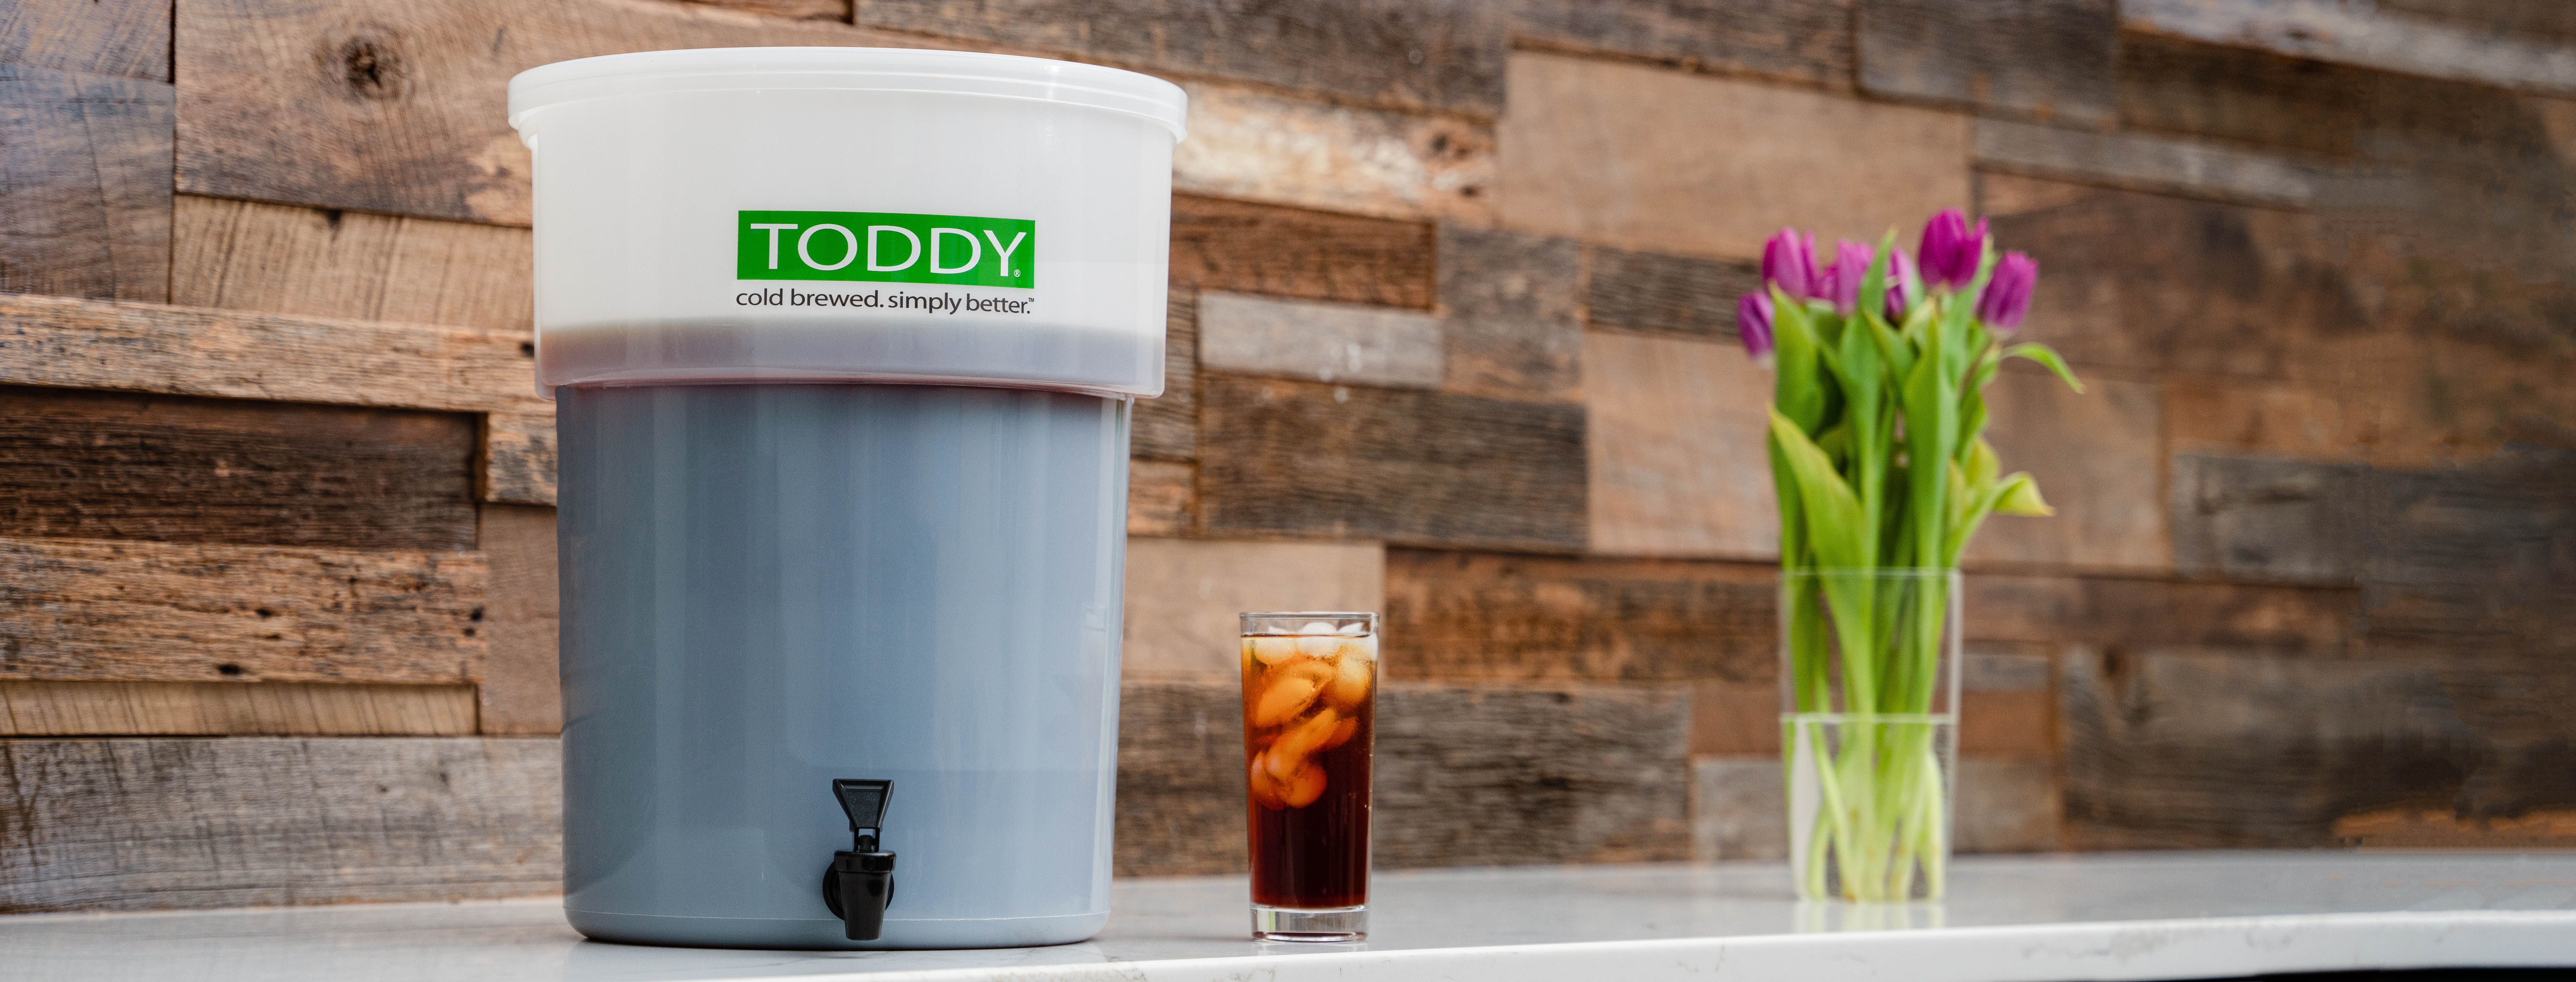 Toddy Commercial Model with beverage and tulips against wood backdrop